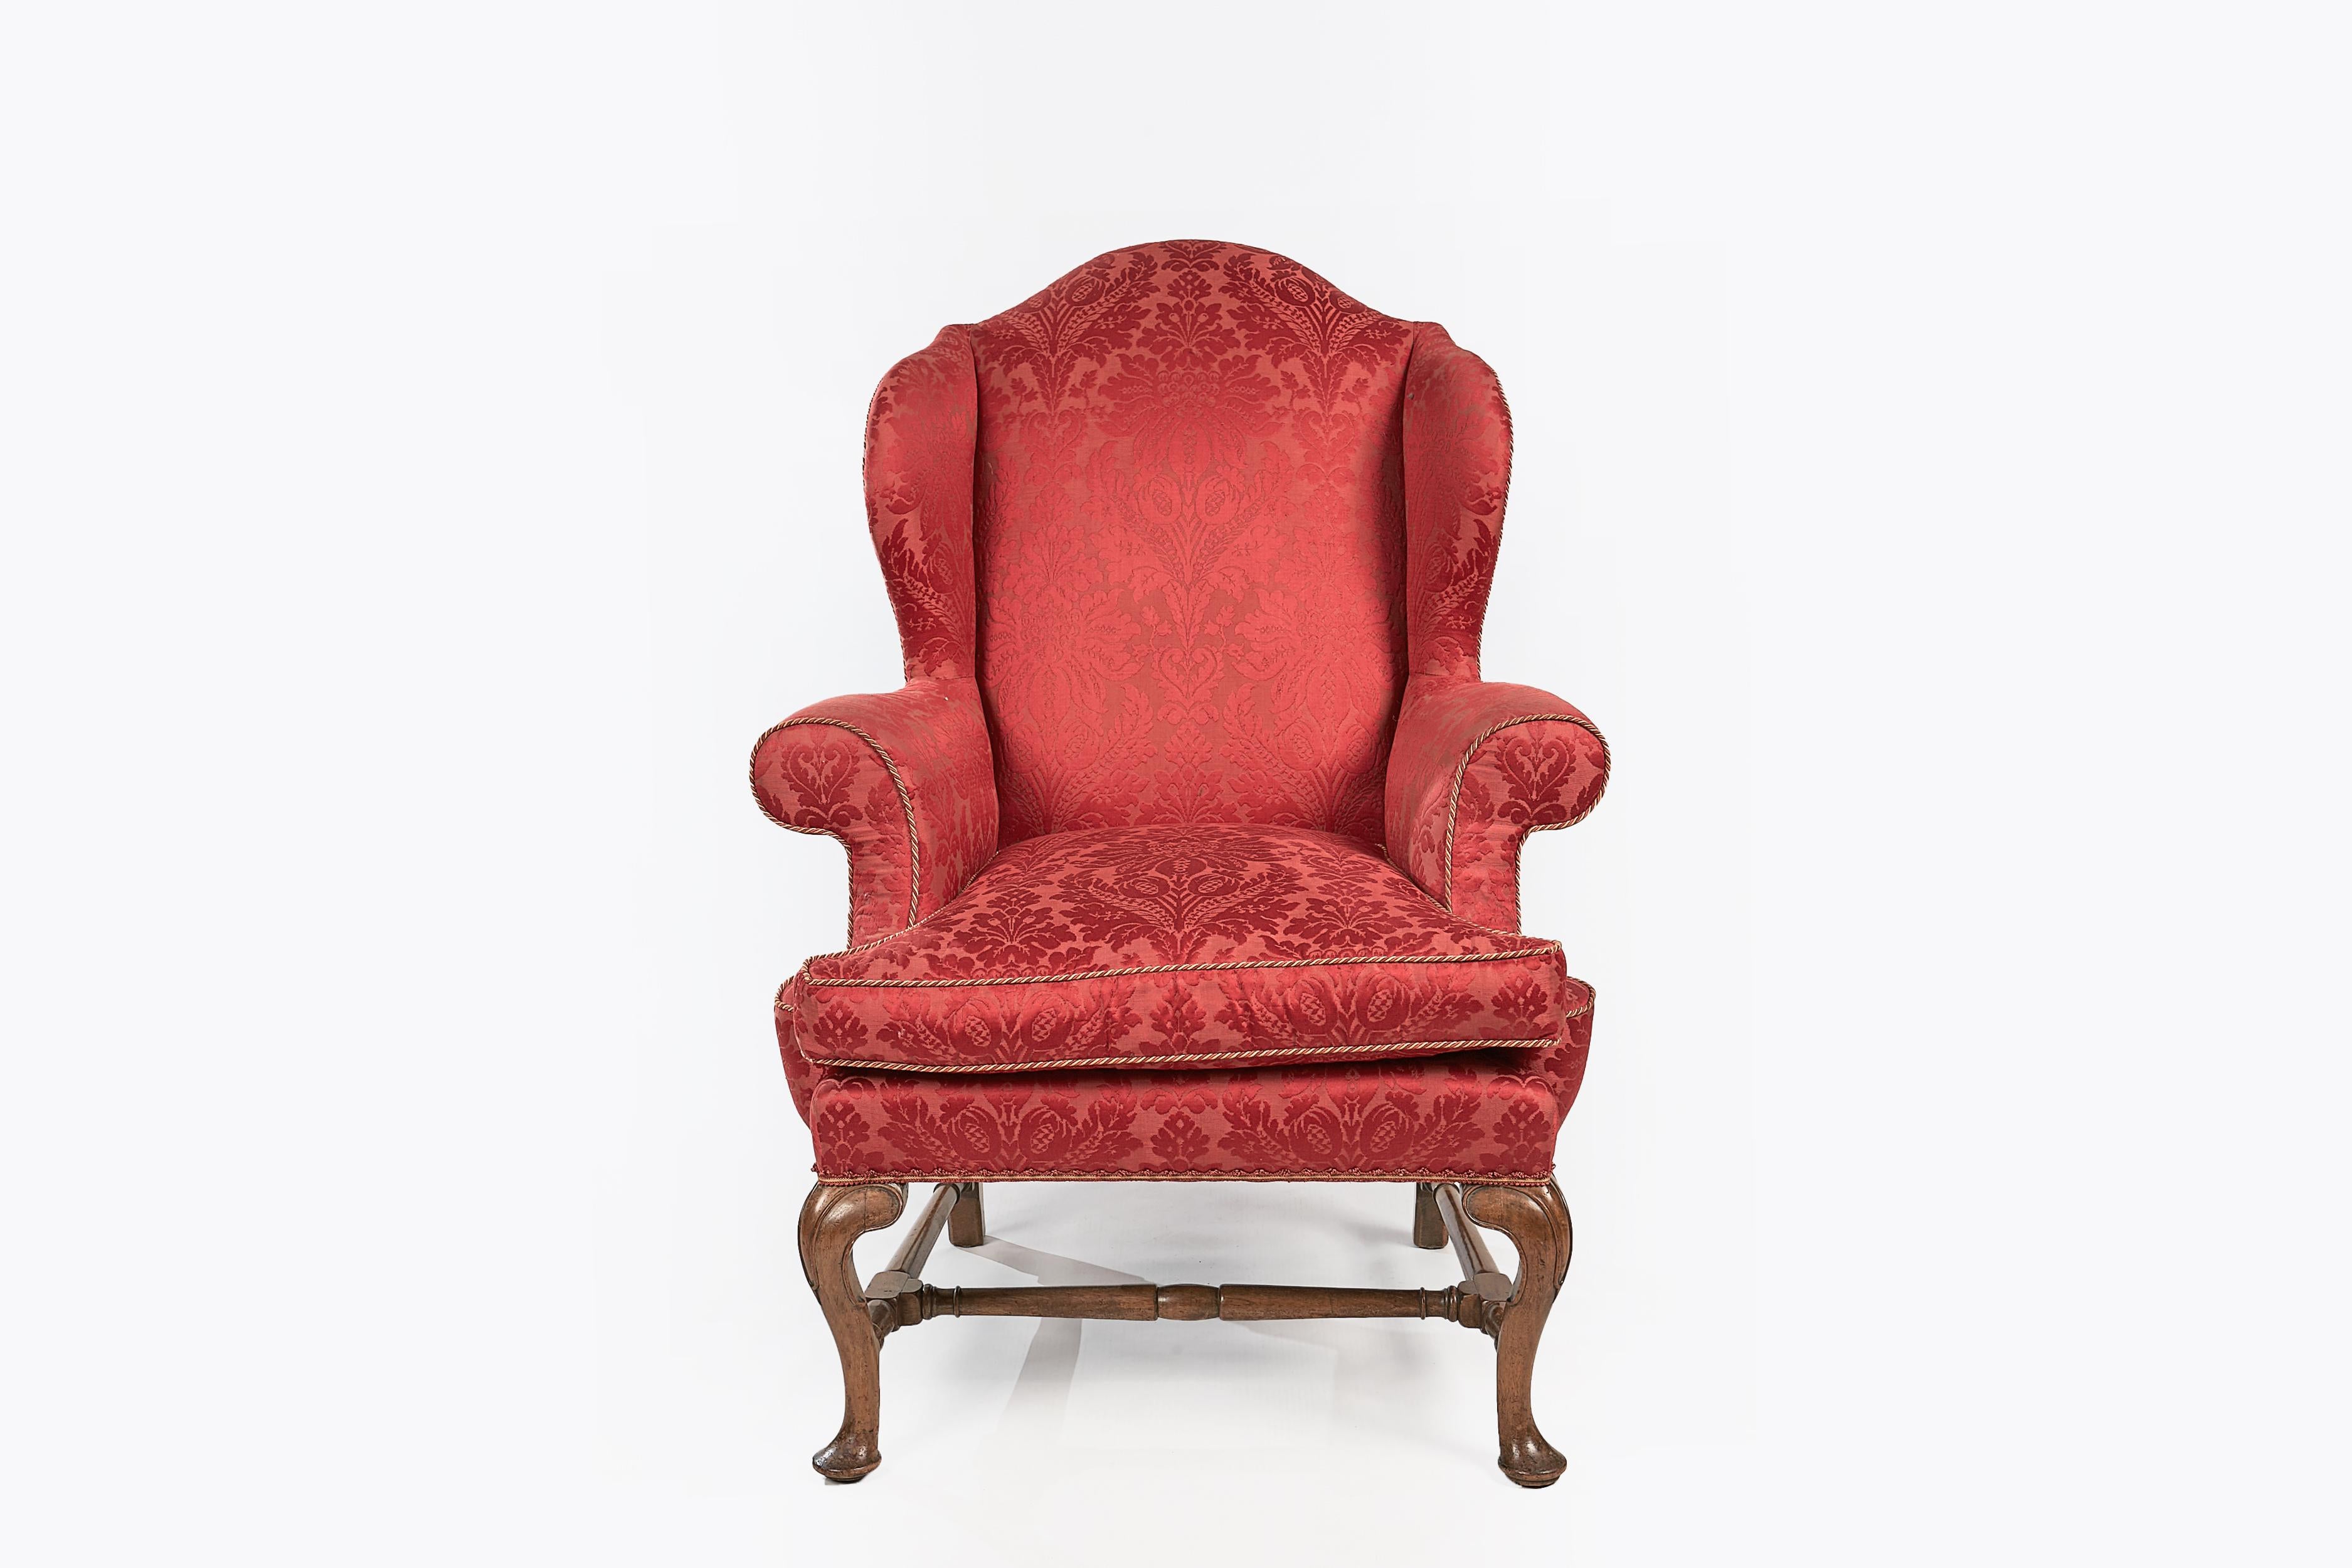 Early 19th century Regency pair of walnut wing chairs, the shaped back with outscrolled wings and arms raised over moulded cabriole leg joined with turned H stretcher terminating on pad foot.